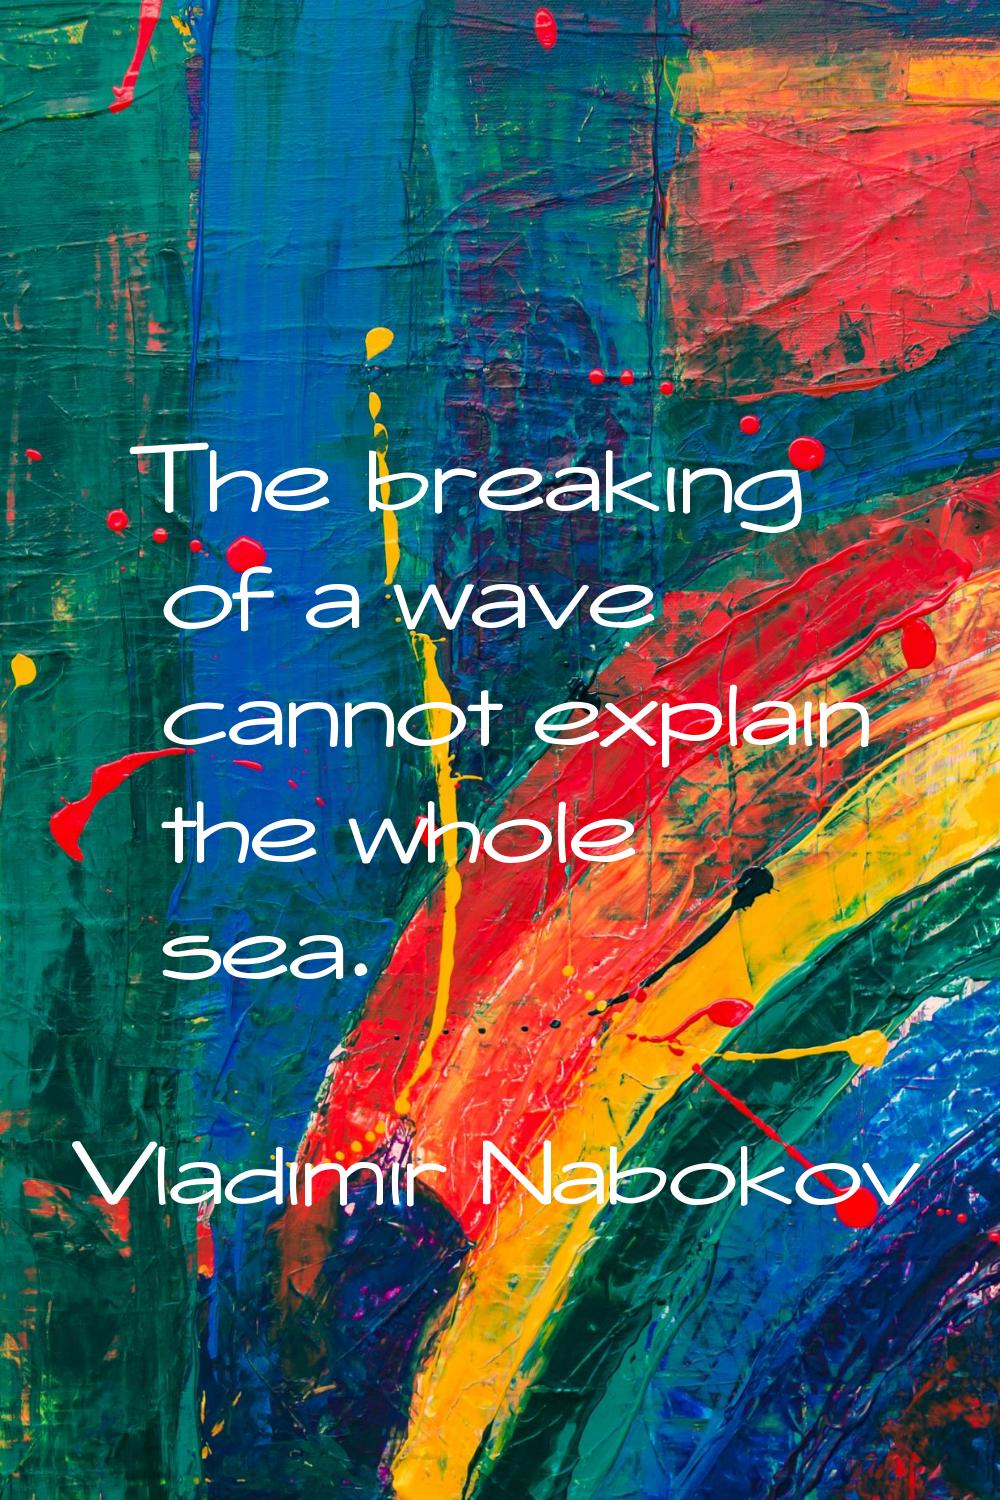 The breaking of a wave cannot explain the whole sea.